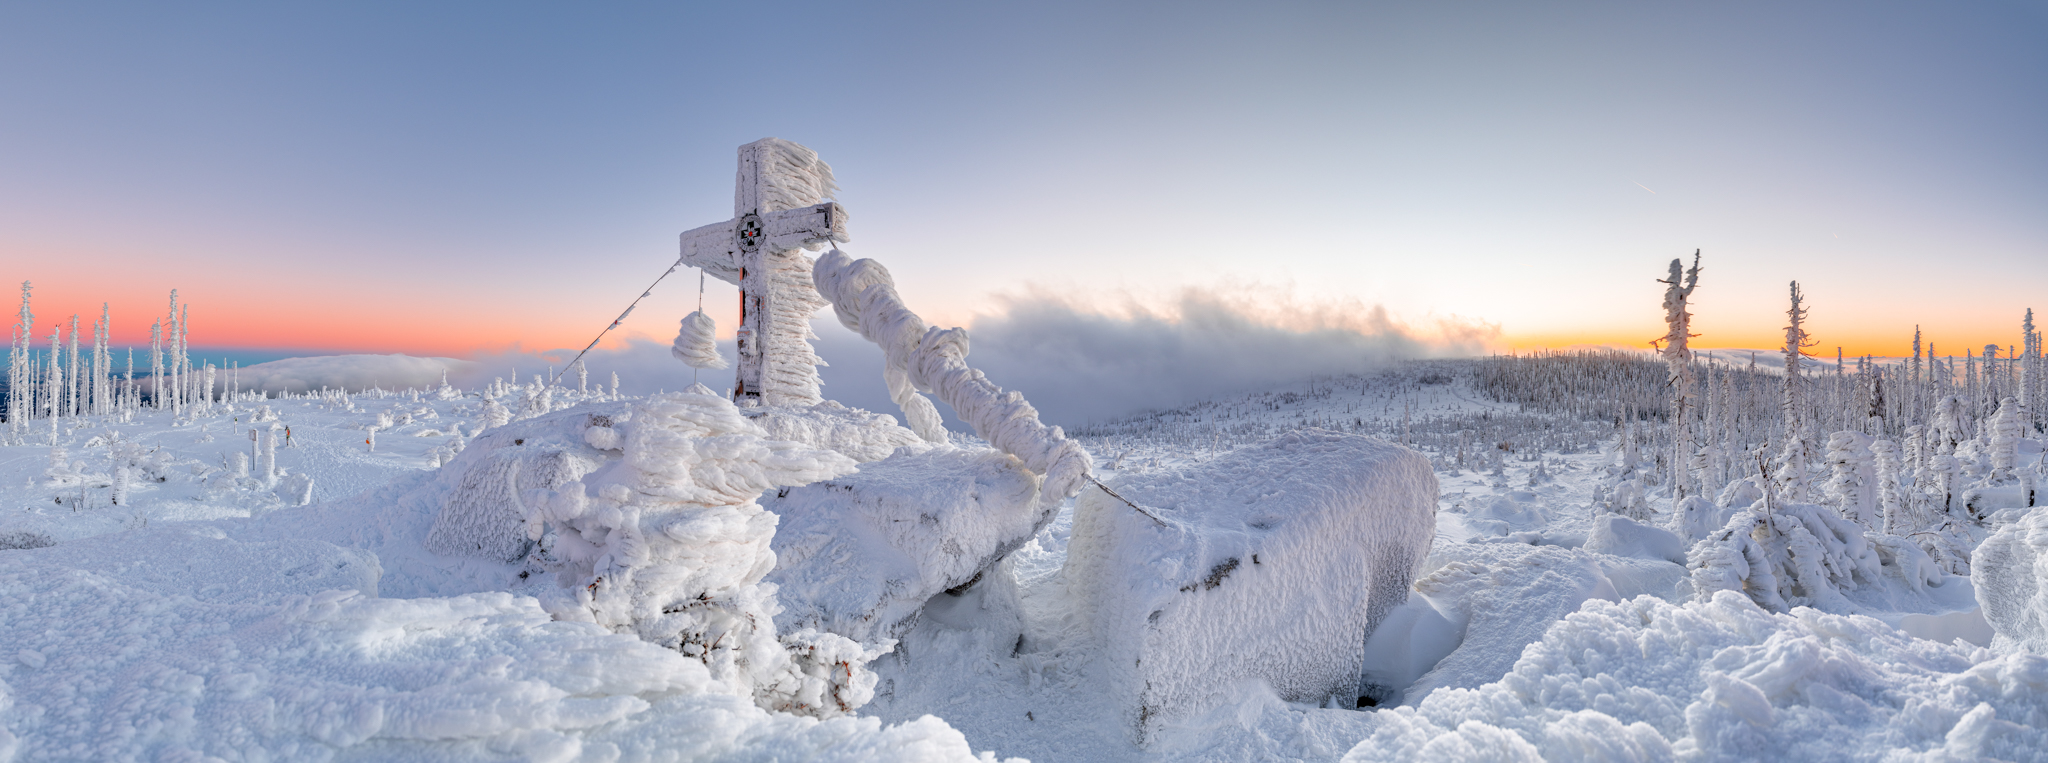 The highest point of Šumava - Plechý covered with snow during sunset